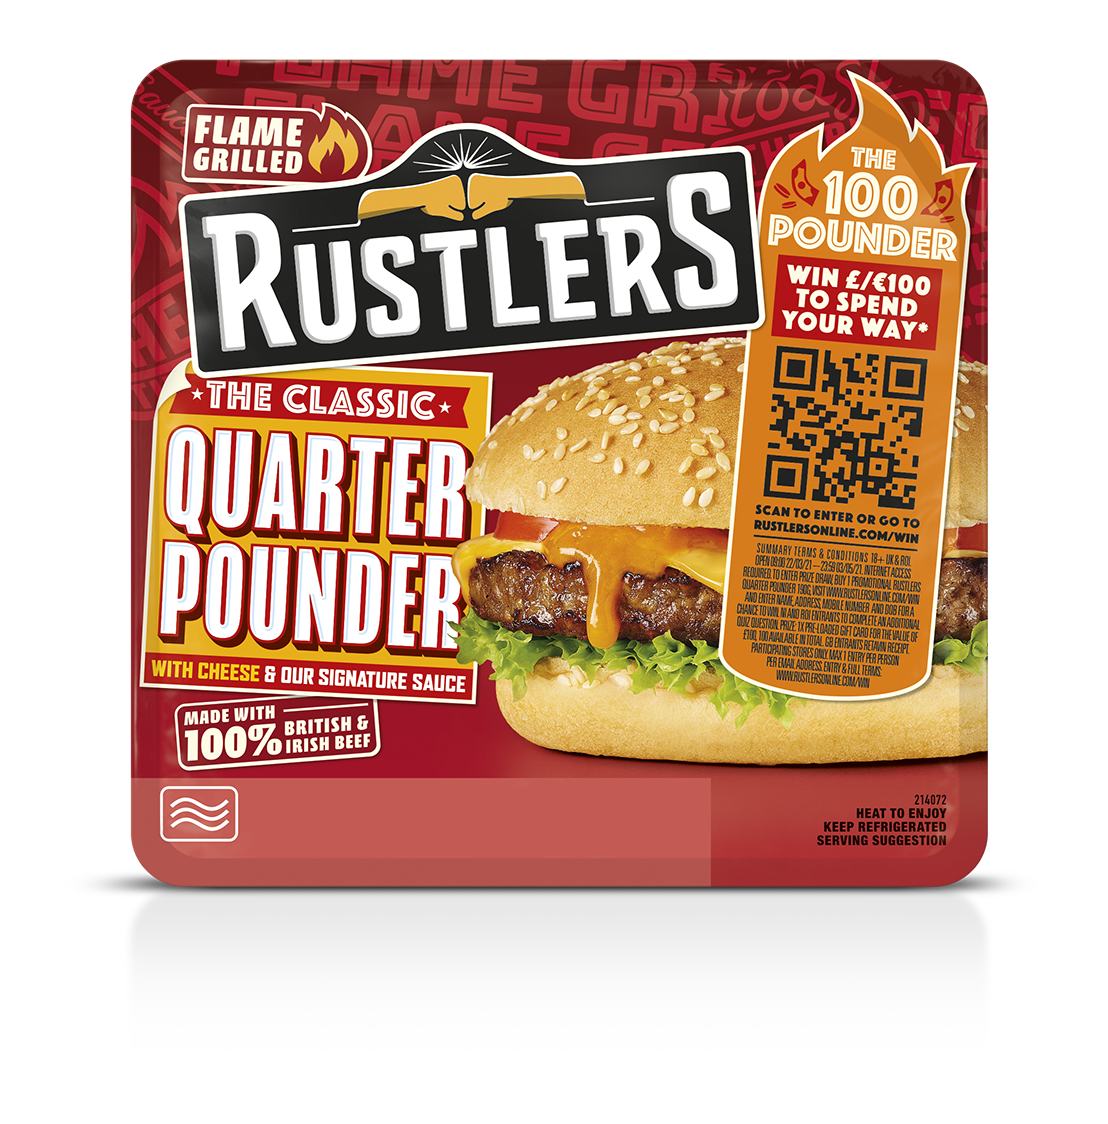 Rustlers launches 100 Pounder promotion